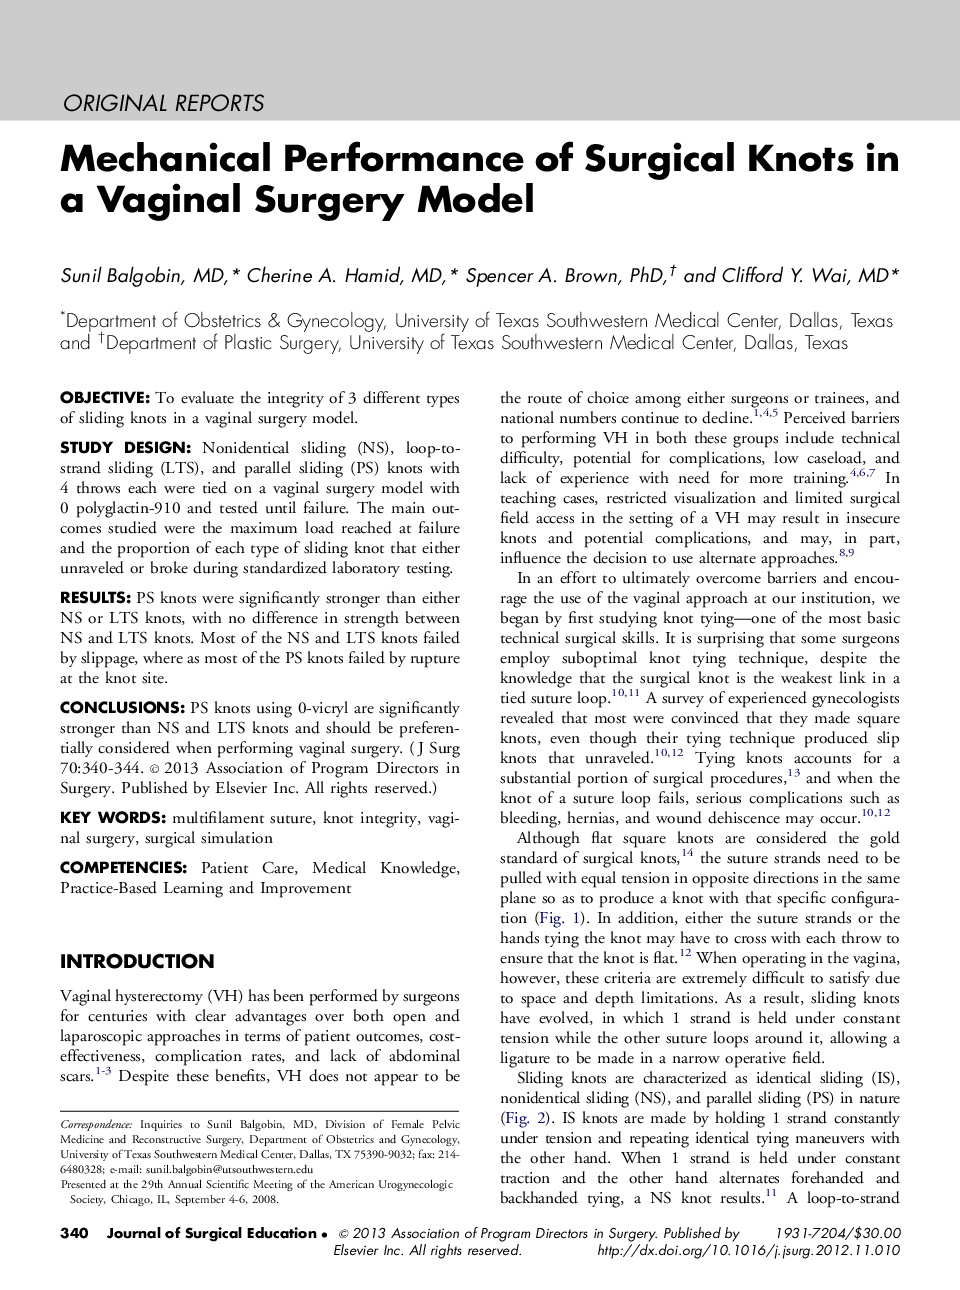 Mechanical Performance of Surgical Knots in a Vaginal Surgery Model 